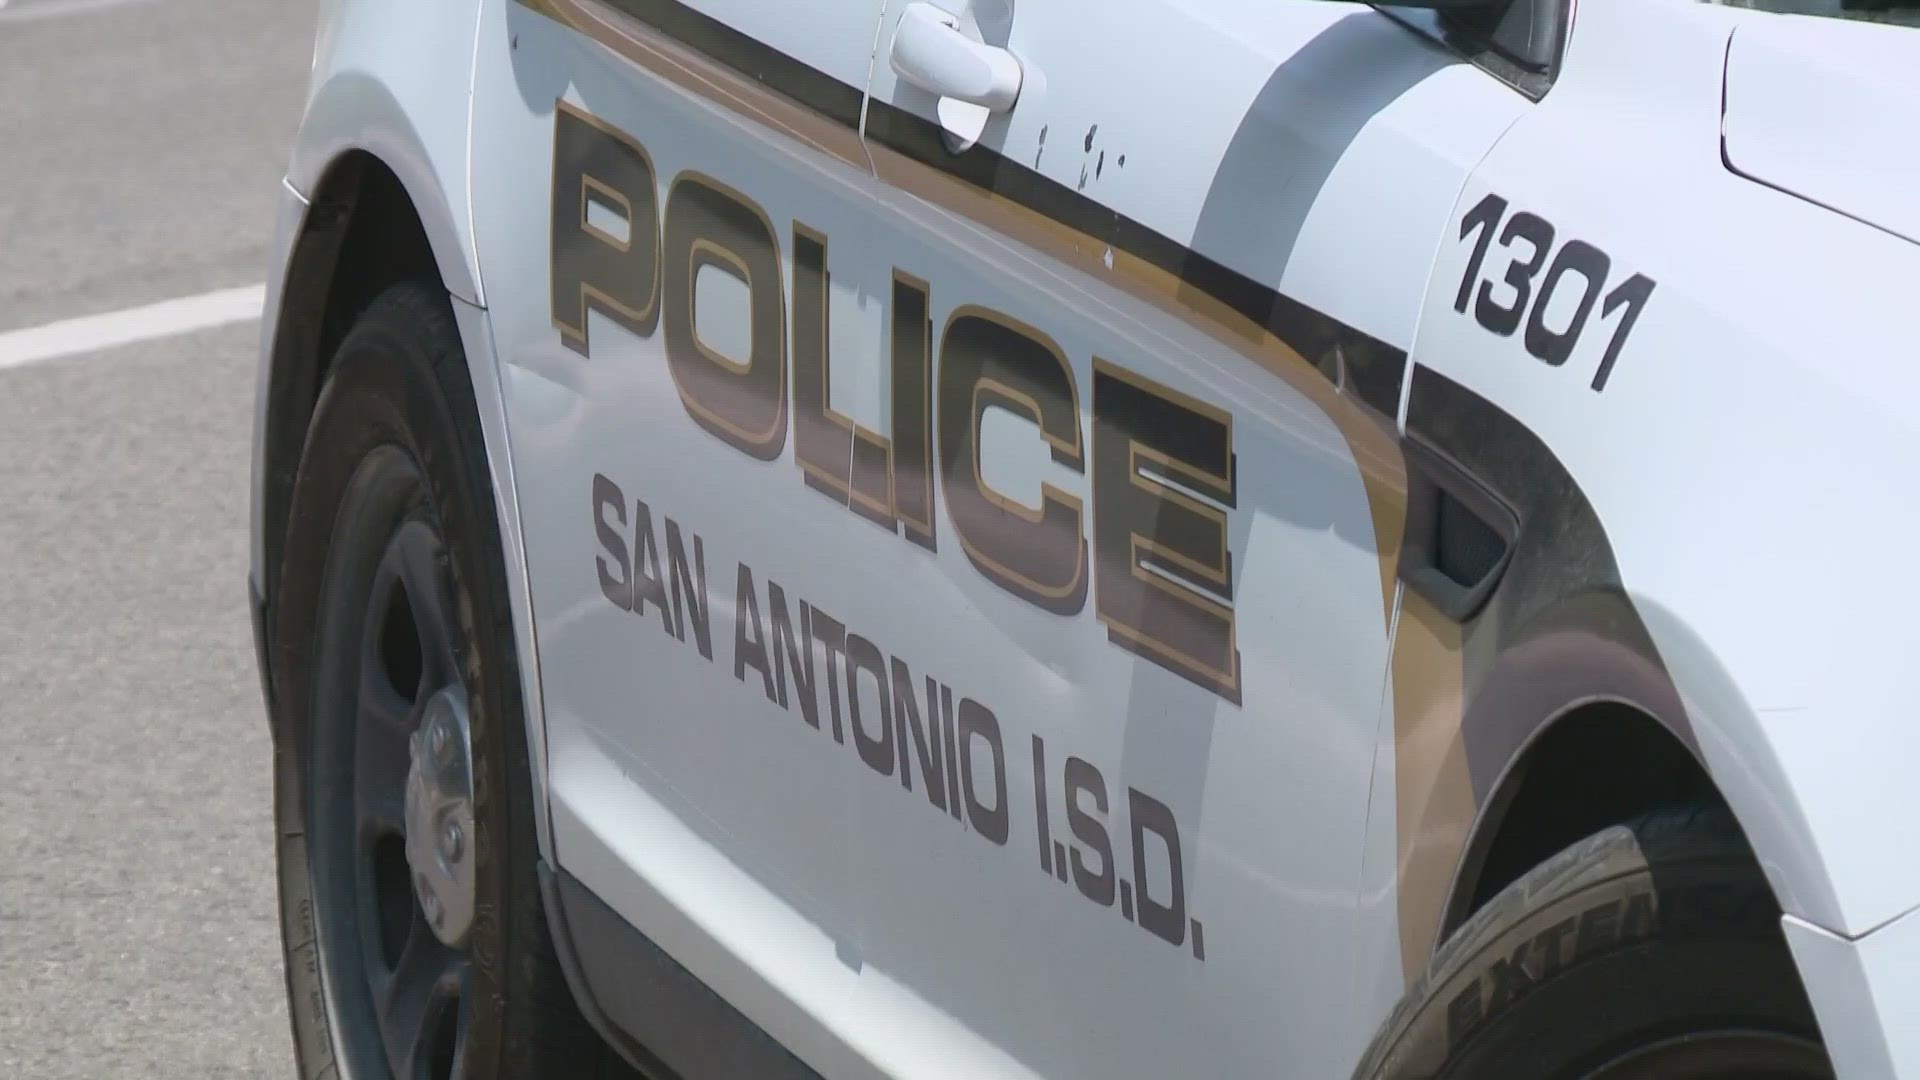 A chase from the Sam Houston High School area ended in the Medical Center with one suspect in custody.